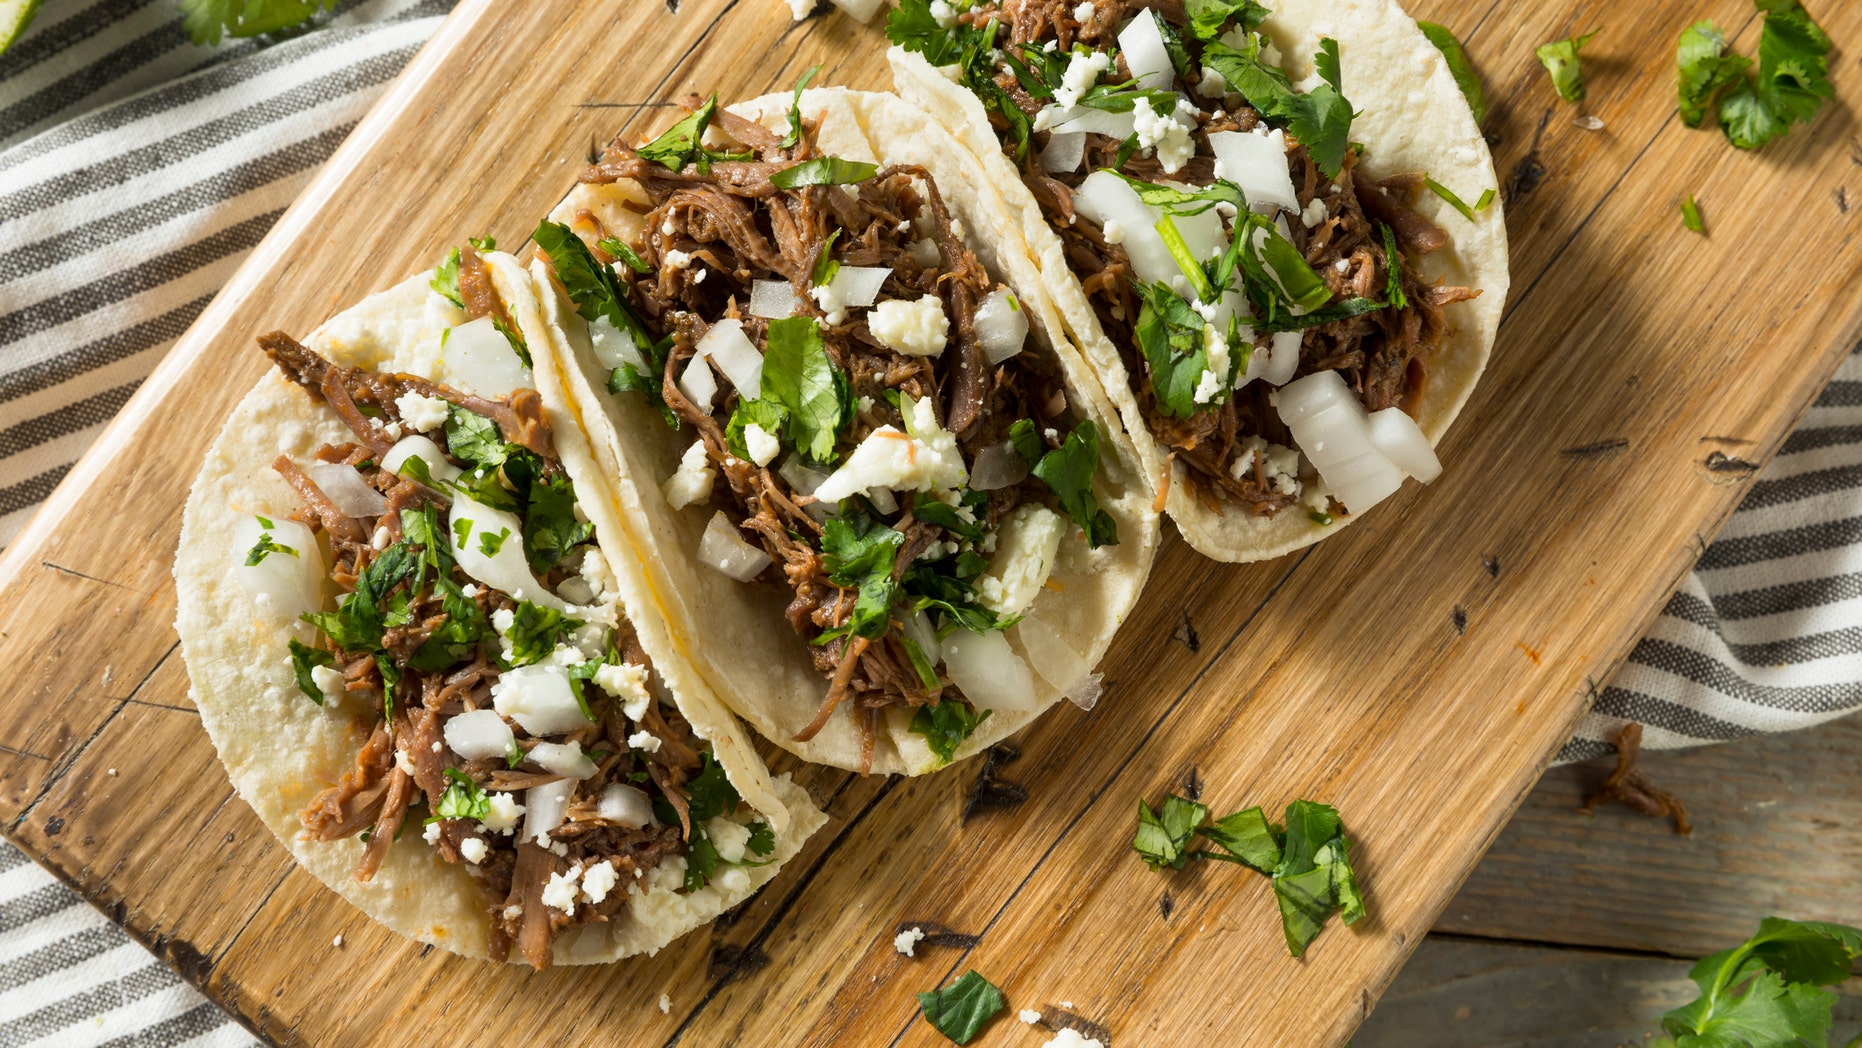 A taco truck in Humble, Texas, had a lot of business after the owner's daughter tweeted asking for support. (iStock)